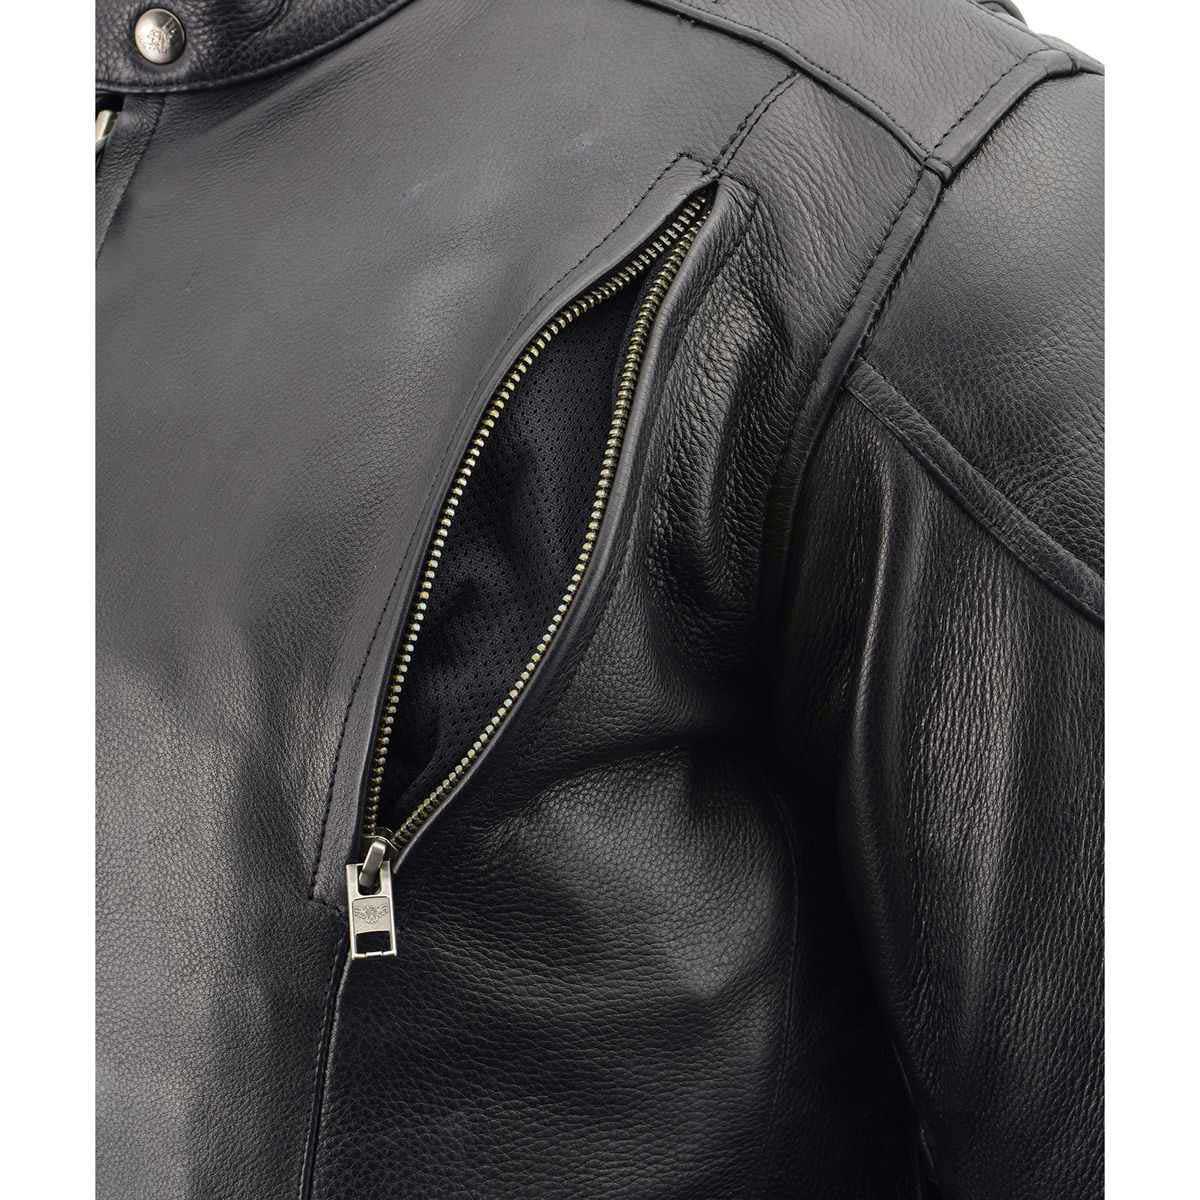 Men's Black Vented Scooter Leather Jacket with Side Laces